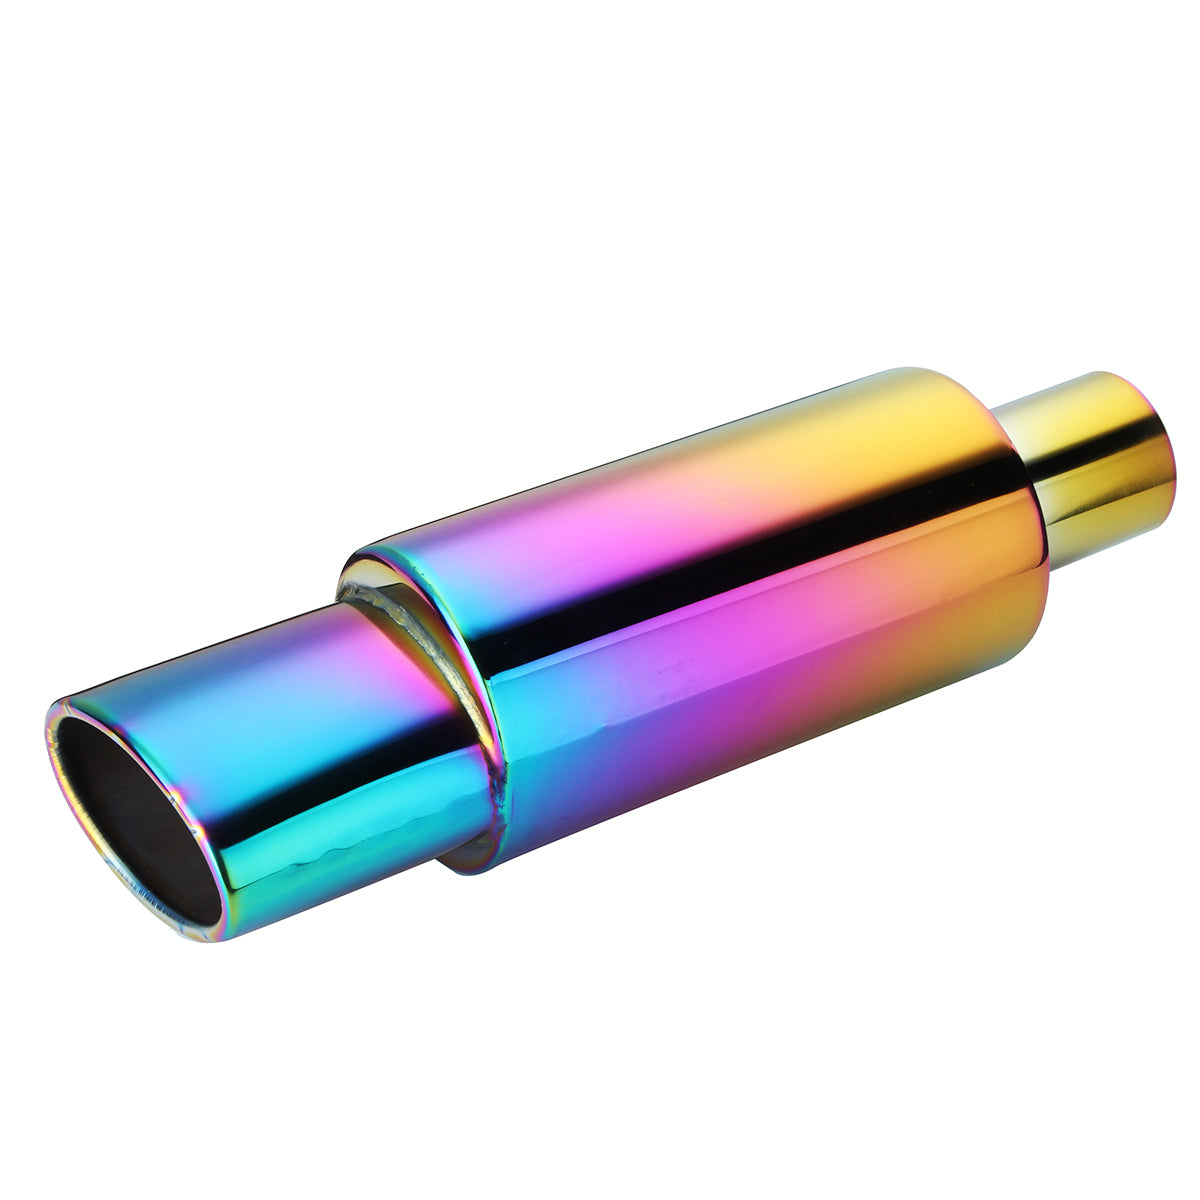 Orchid 55mm Stainless Steel Exhaust Pipe Racing Muffler Tip Universal